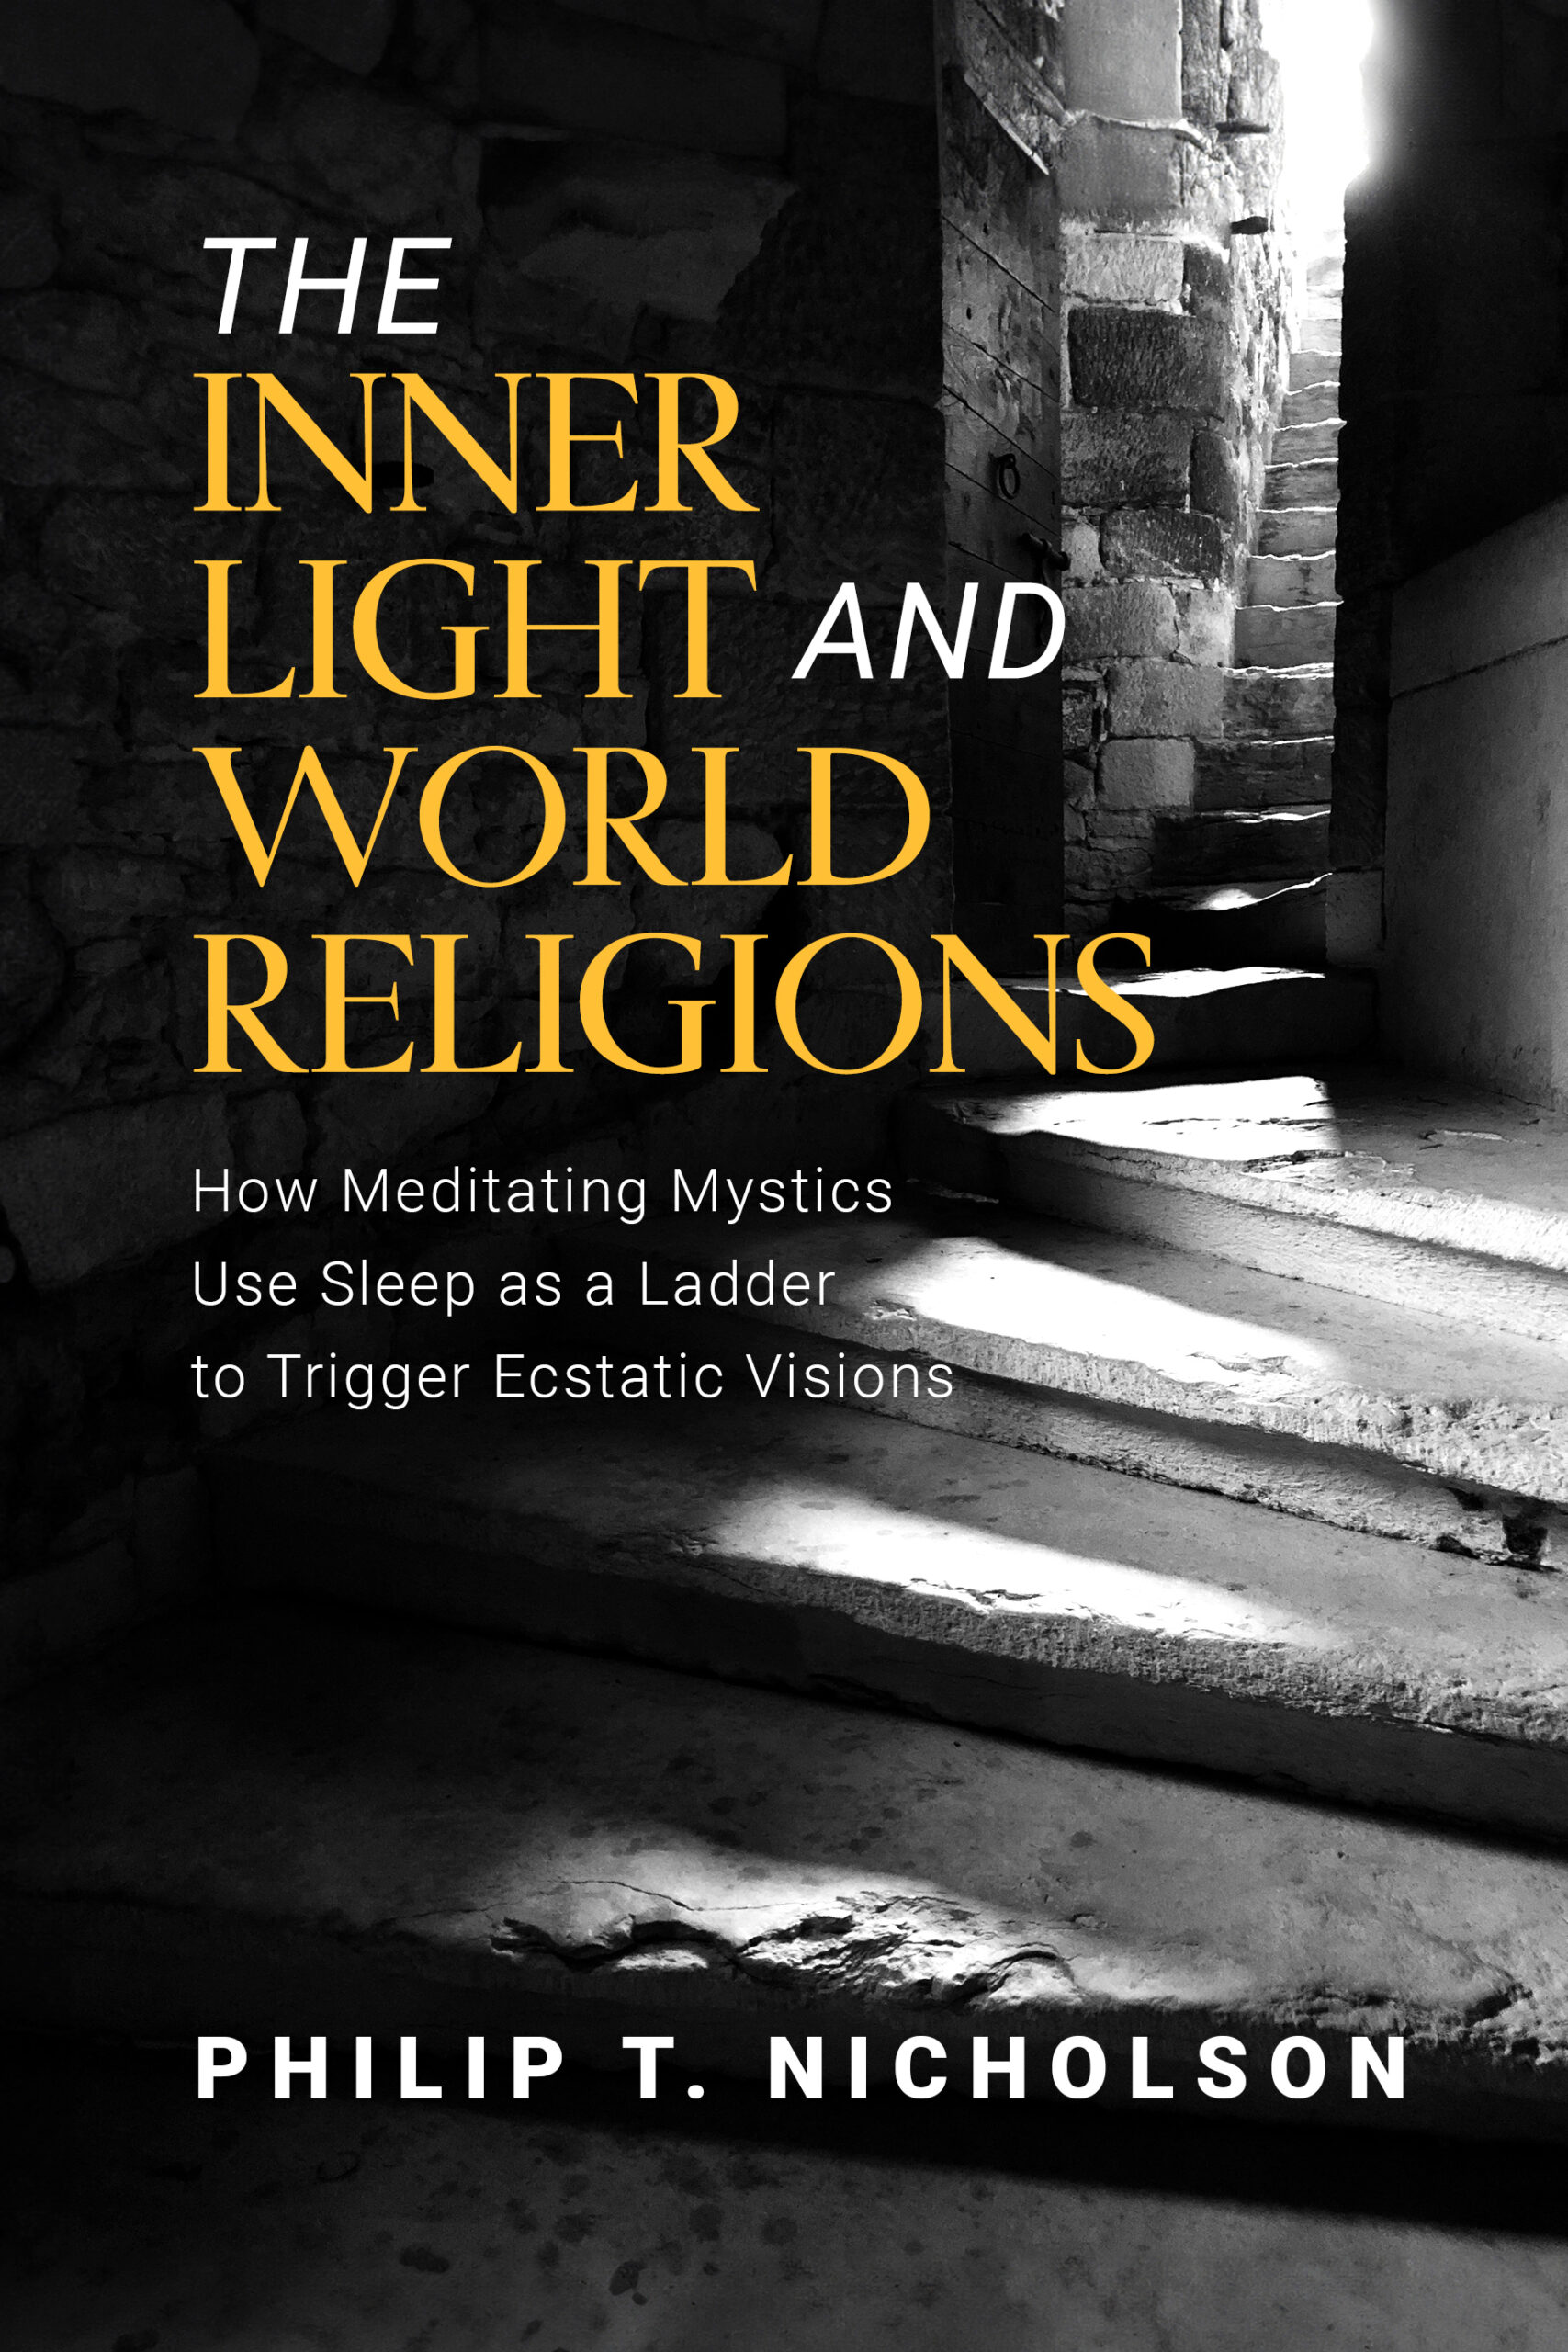 The Inner Light and World Religions by Philip T. Nicholson